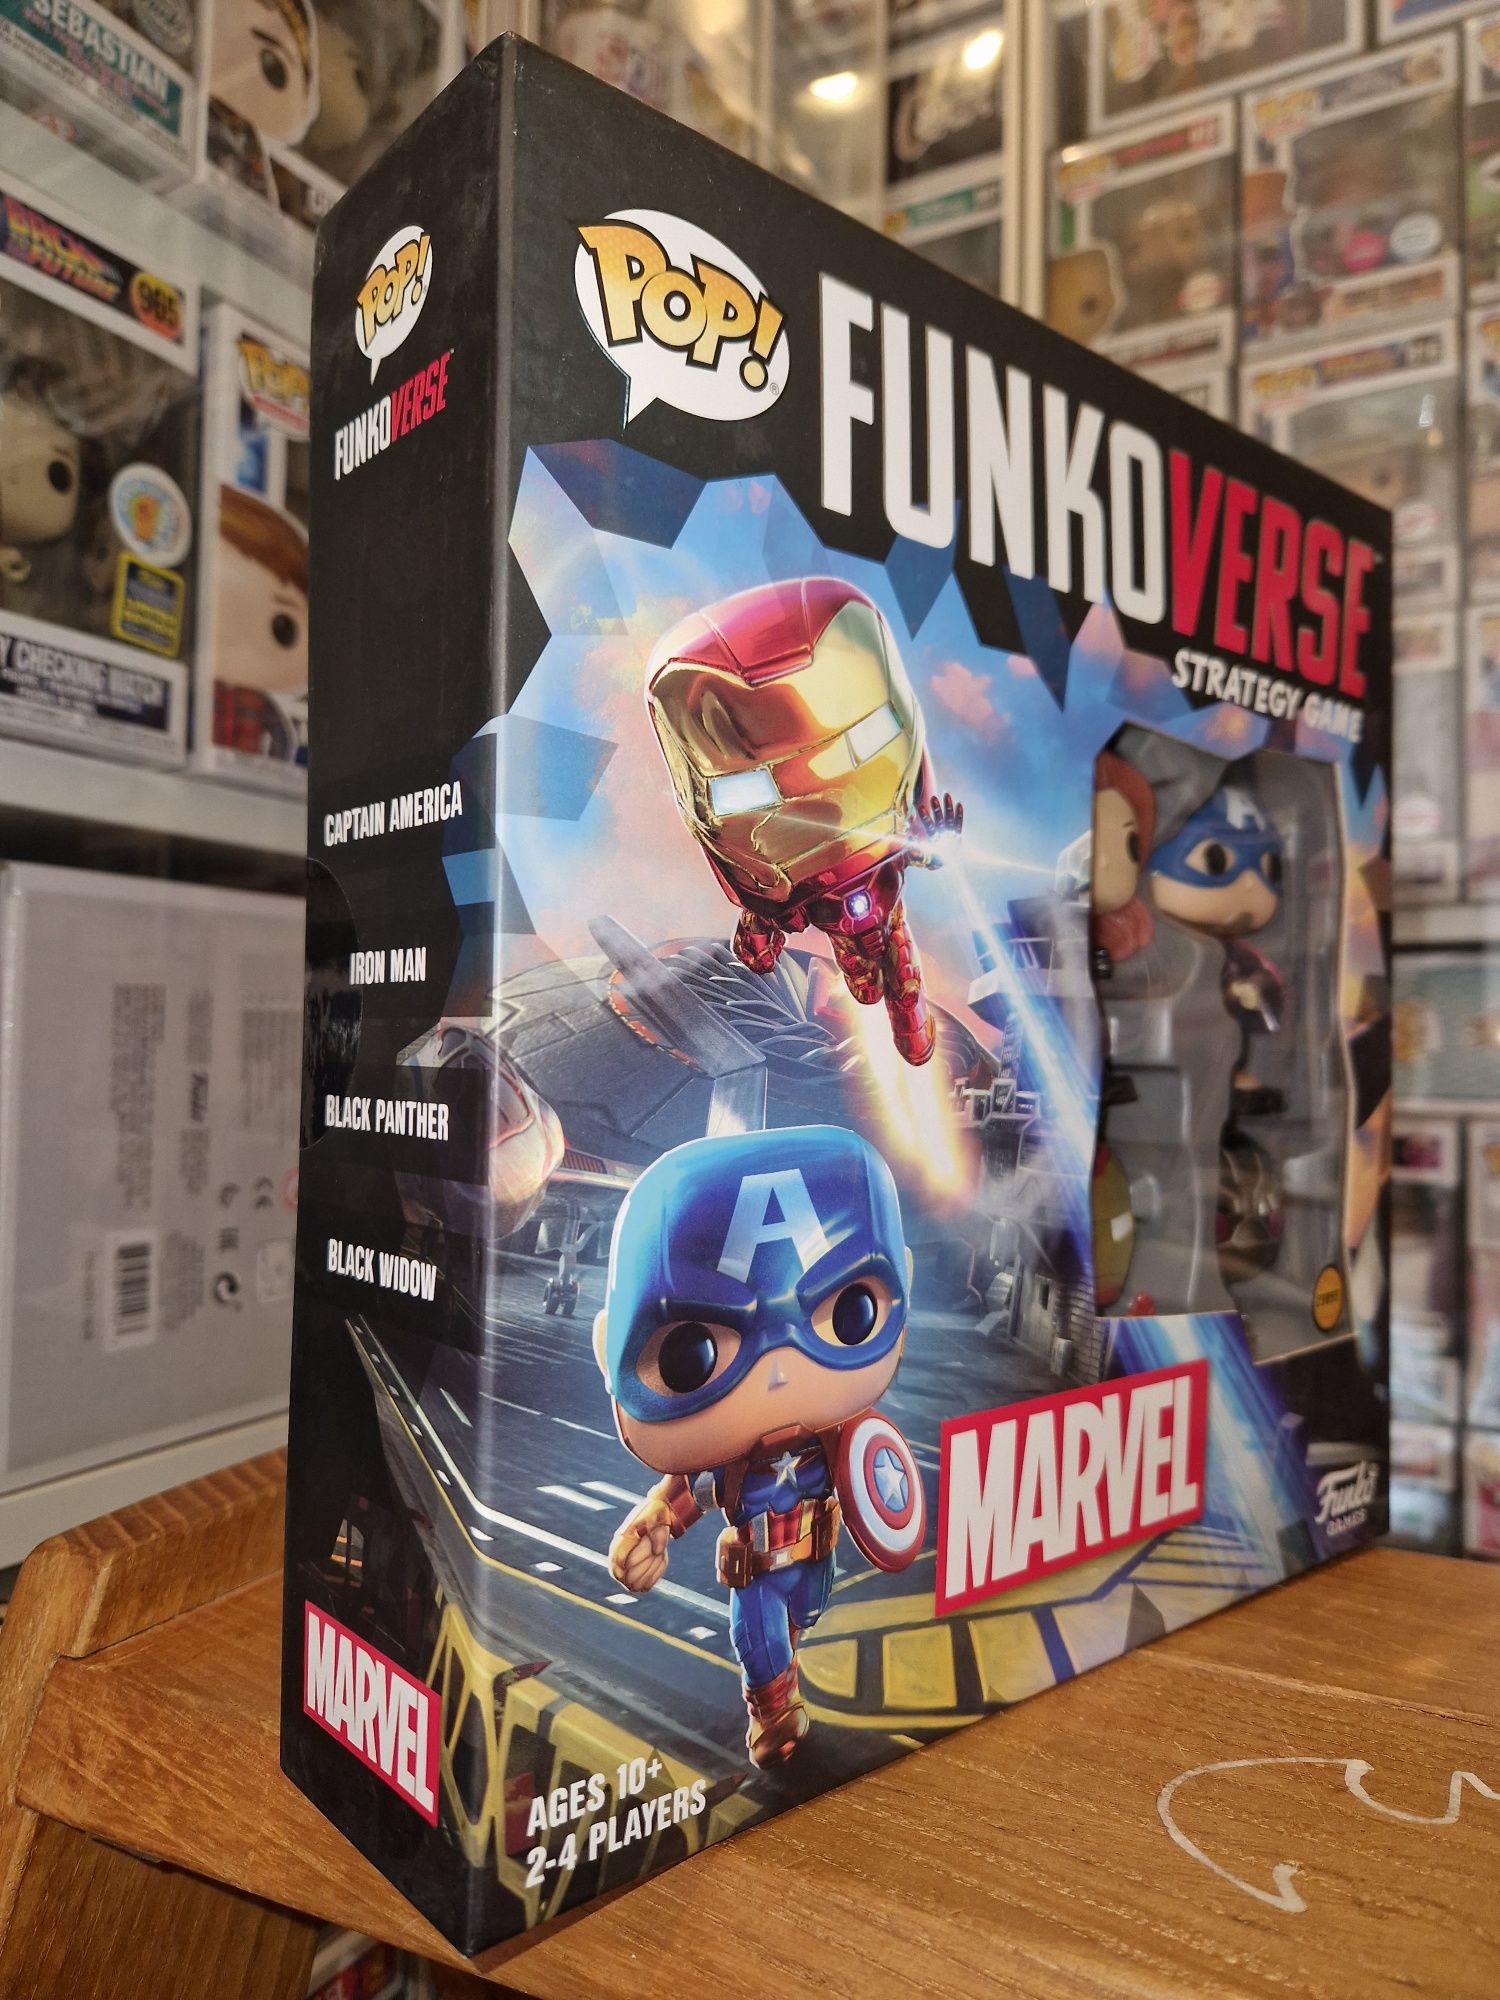 Funkoverse Game Marvel with Chase